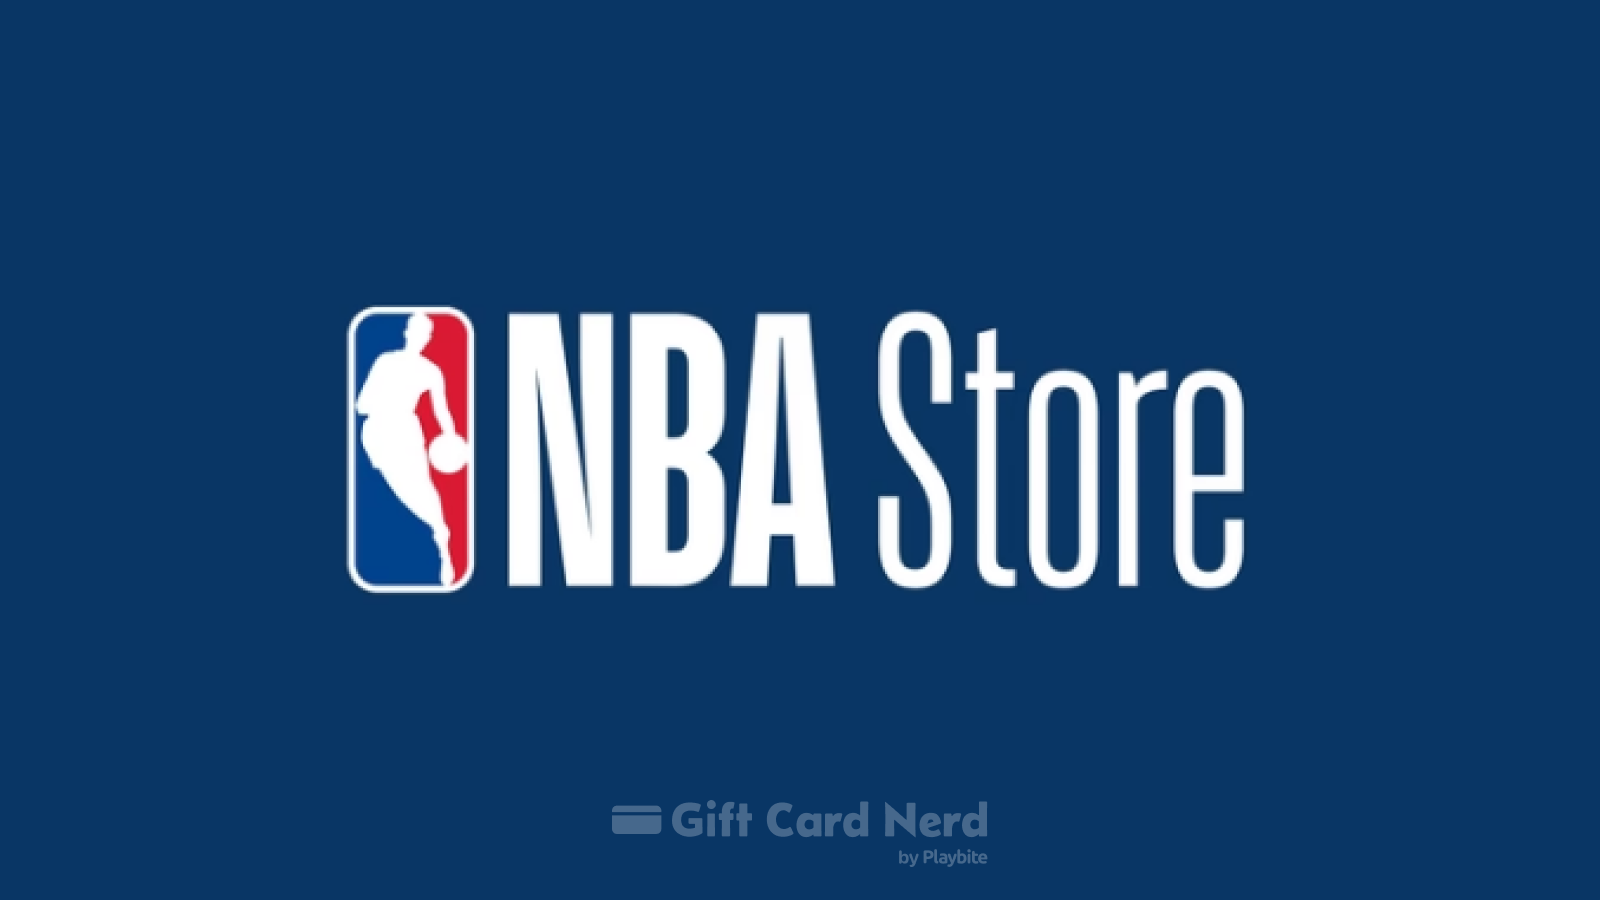 Does Target Sell NBA Store Gift Cards?